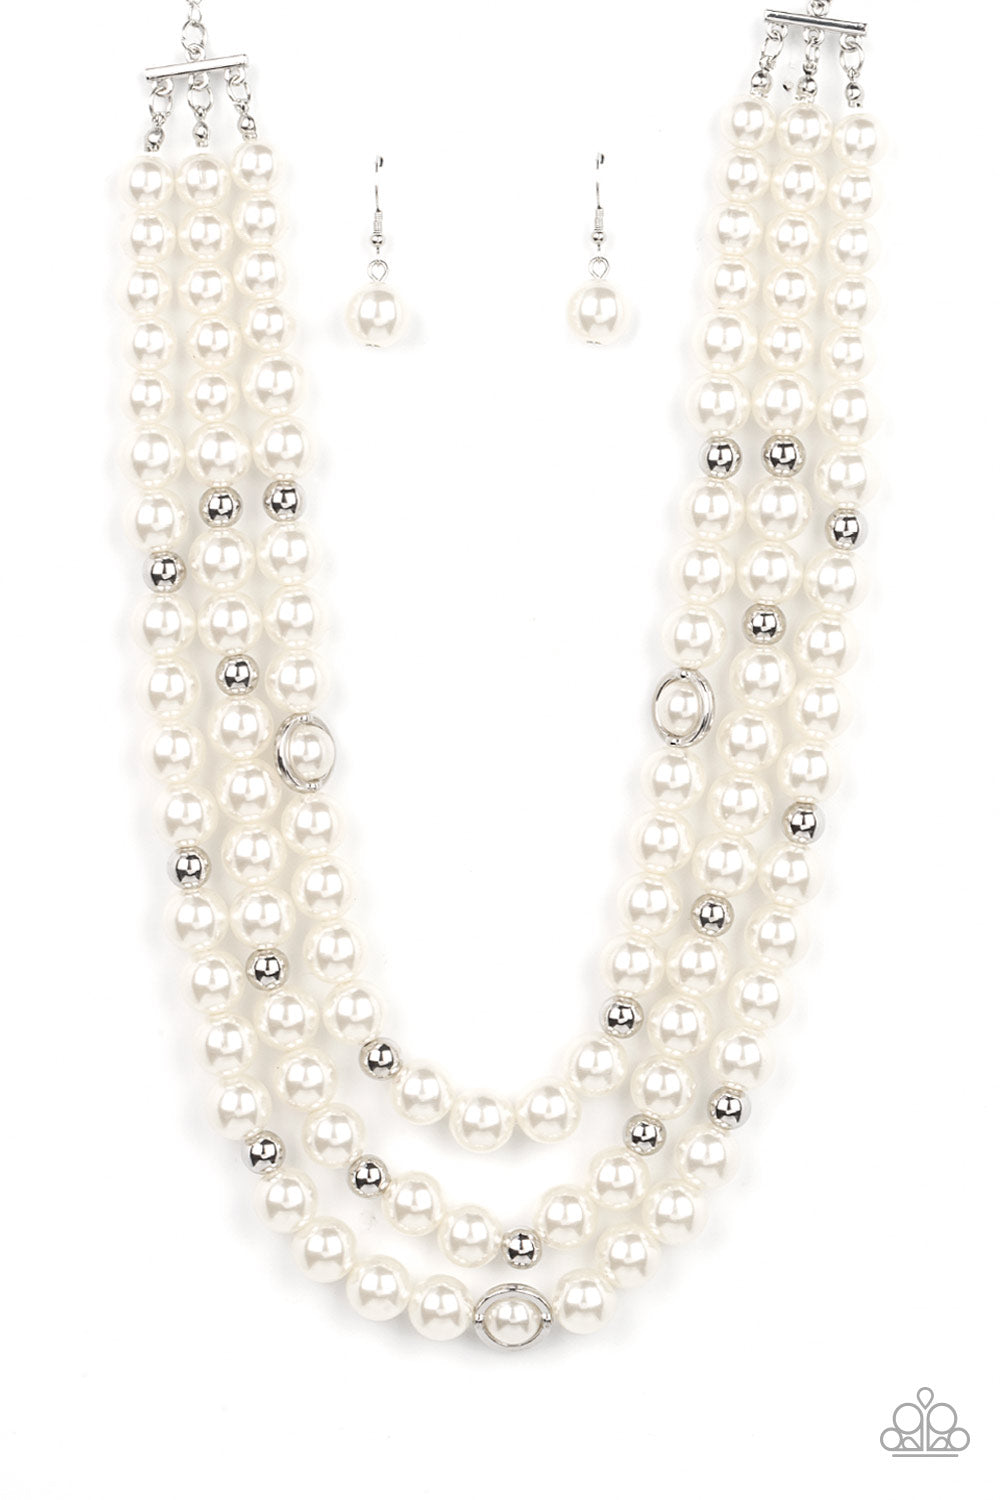 Paparazzi Accessories Needs No Introduction - White Infused with silver beads and silver rings, a bubbly collection of white pearls are threaded along invisible wires that cascade into effervescent layers below the collar. Features an adjustable clasp clo